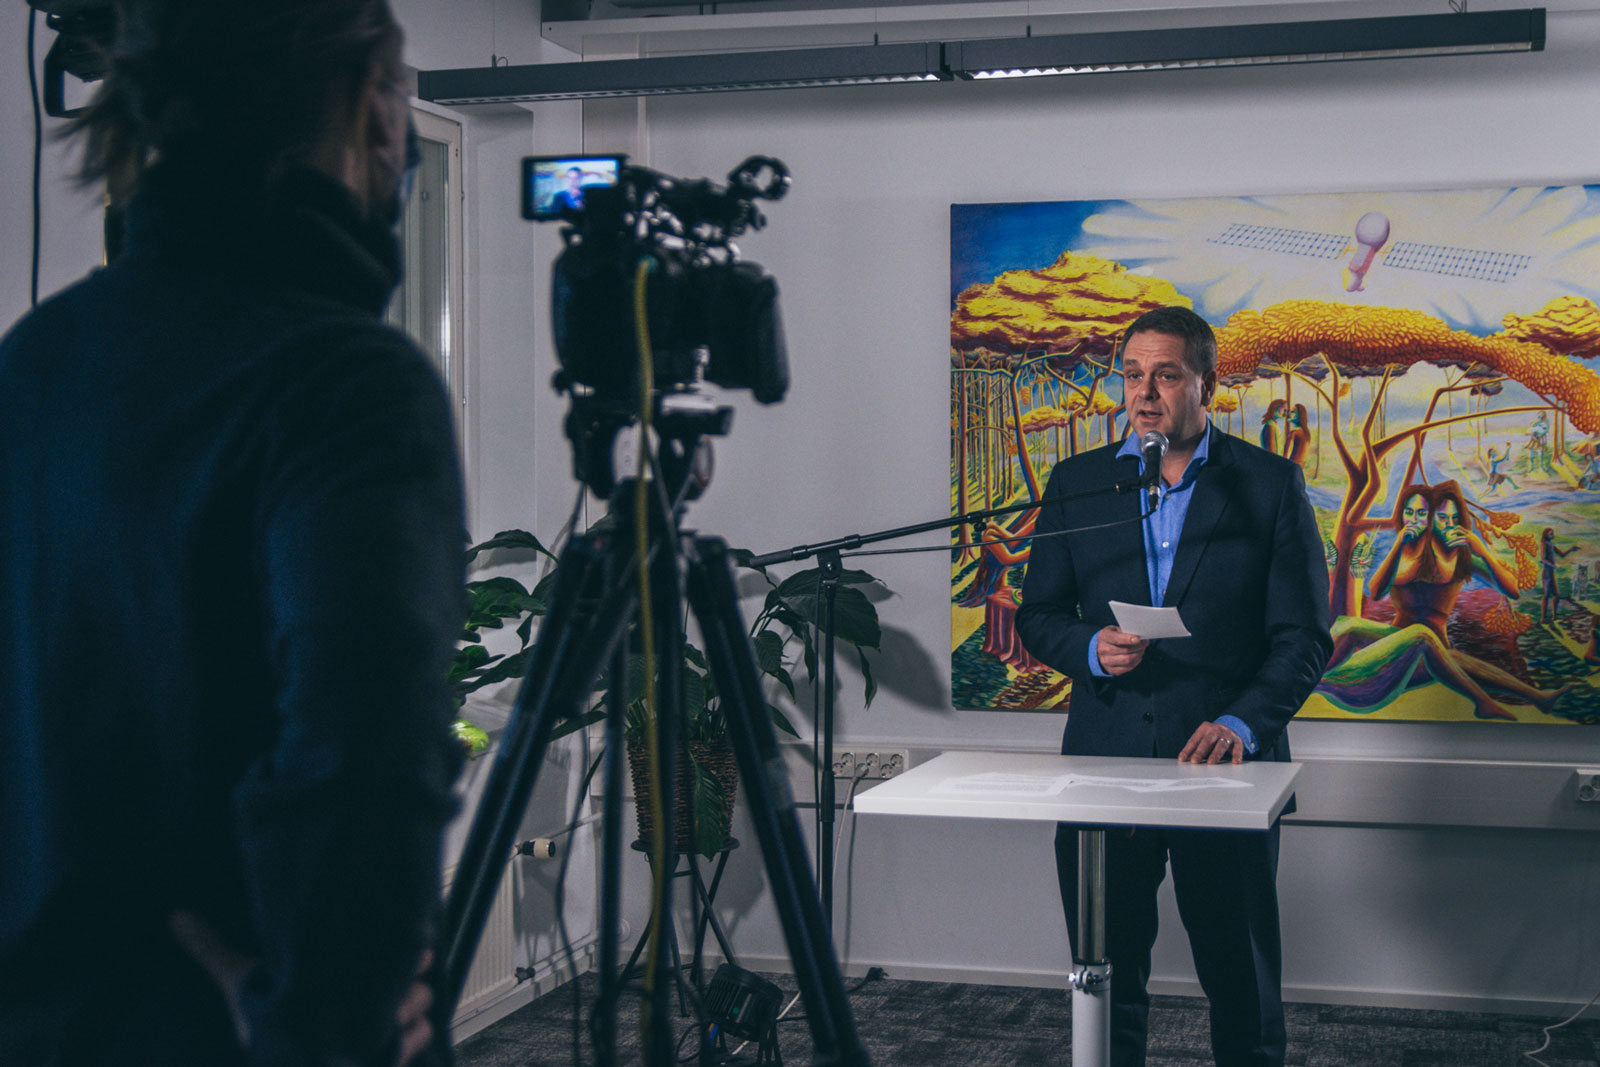 On the left there is a cameraperson with a camera on a tripod. On the right, Jan Vapaavuori, the Mayor of Helsinki, is standing in front of a microphone with a paper in his hand, speaking into the camera. Opens in lightbox.